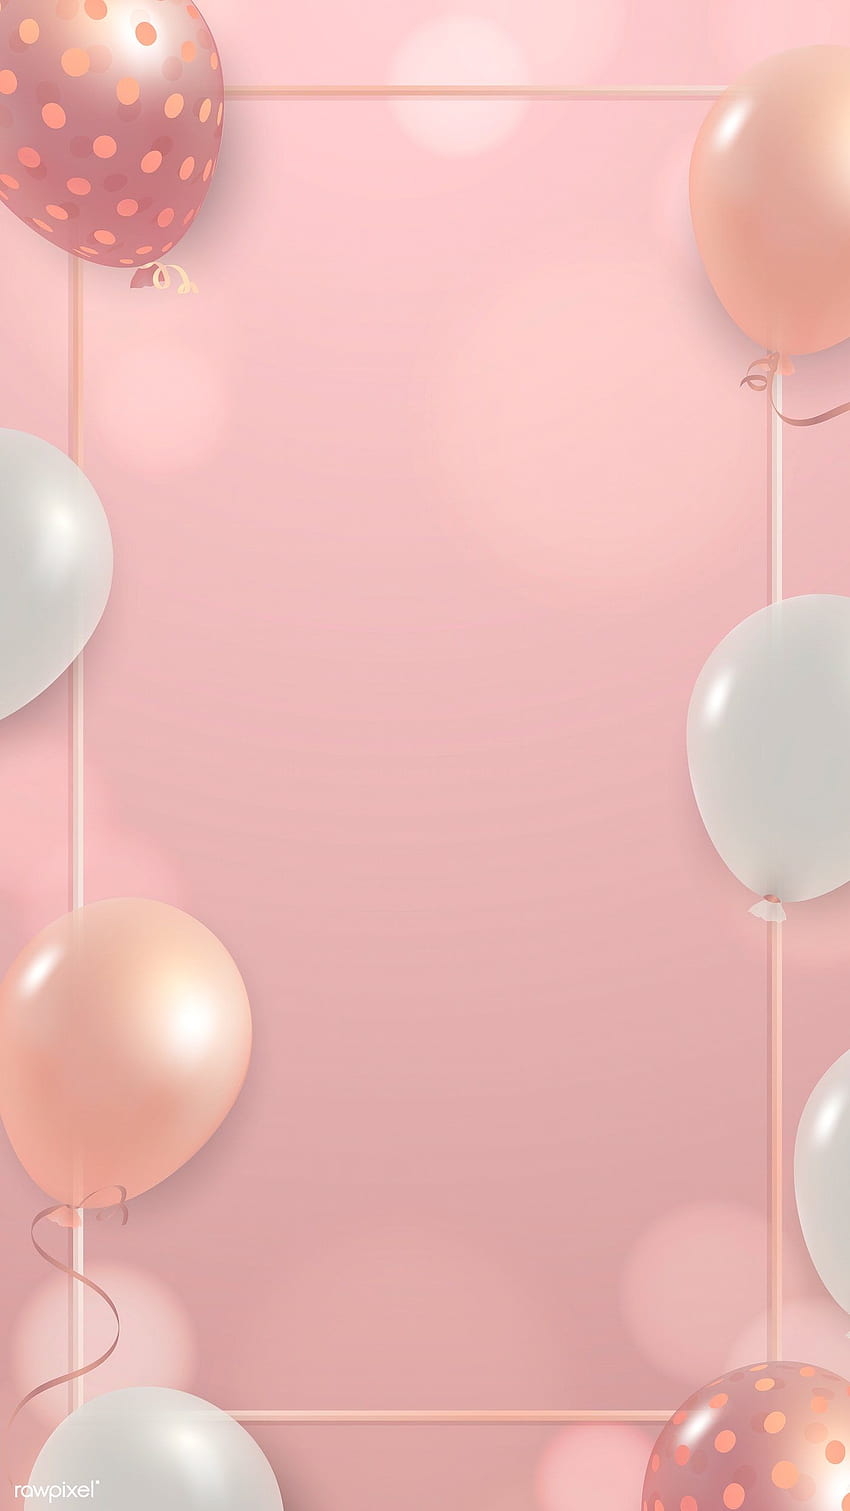 White and pink balloons frame design mobile phone vector HD phone wallpaper